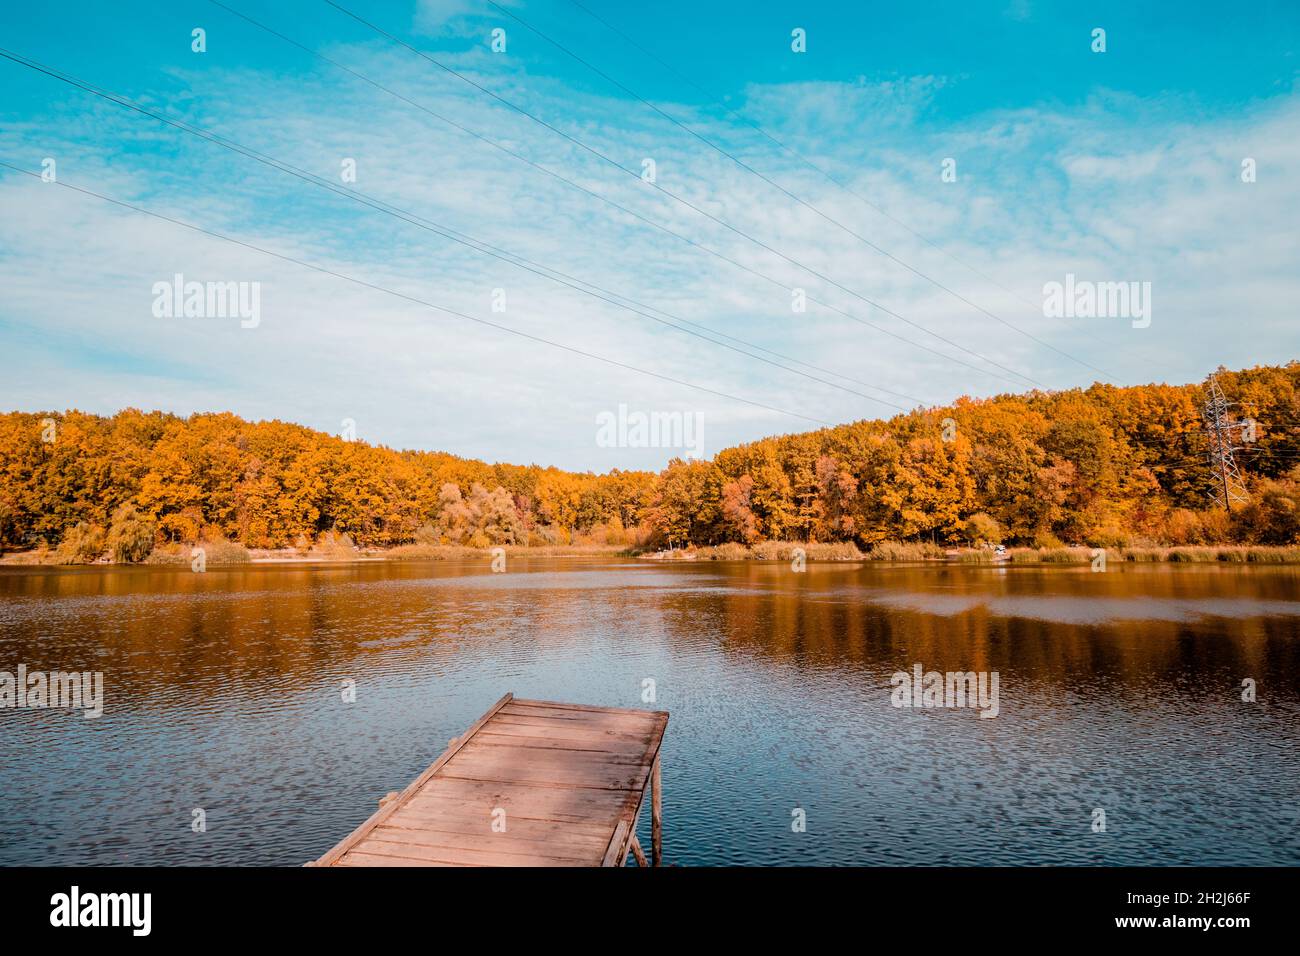 Transparent clear lake with a wooden pier in autumn. Autumn landscape. Stock Photo